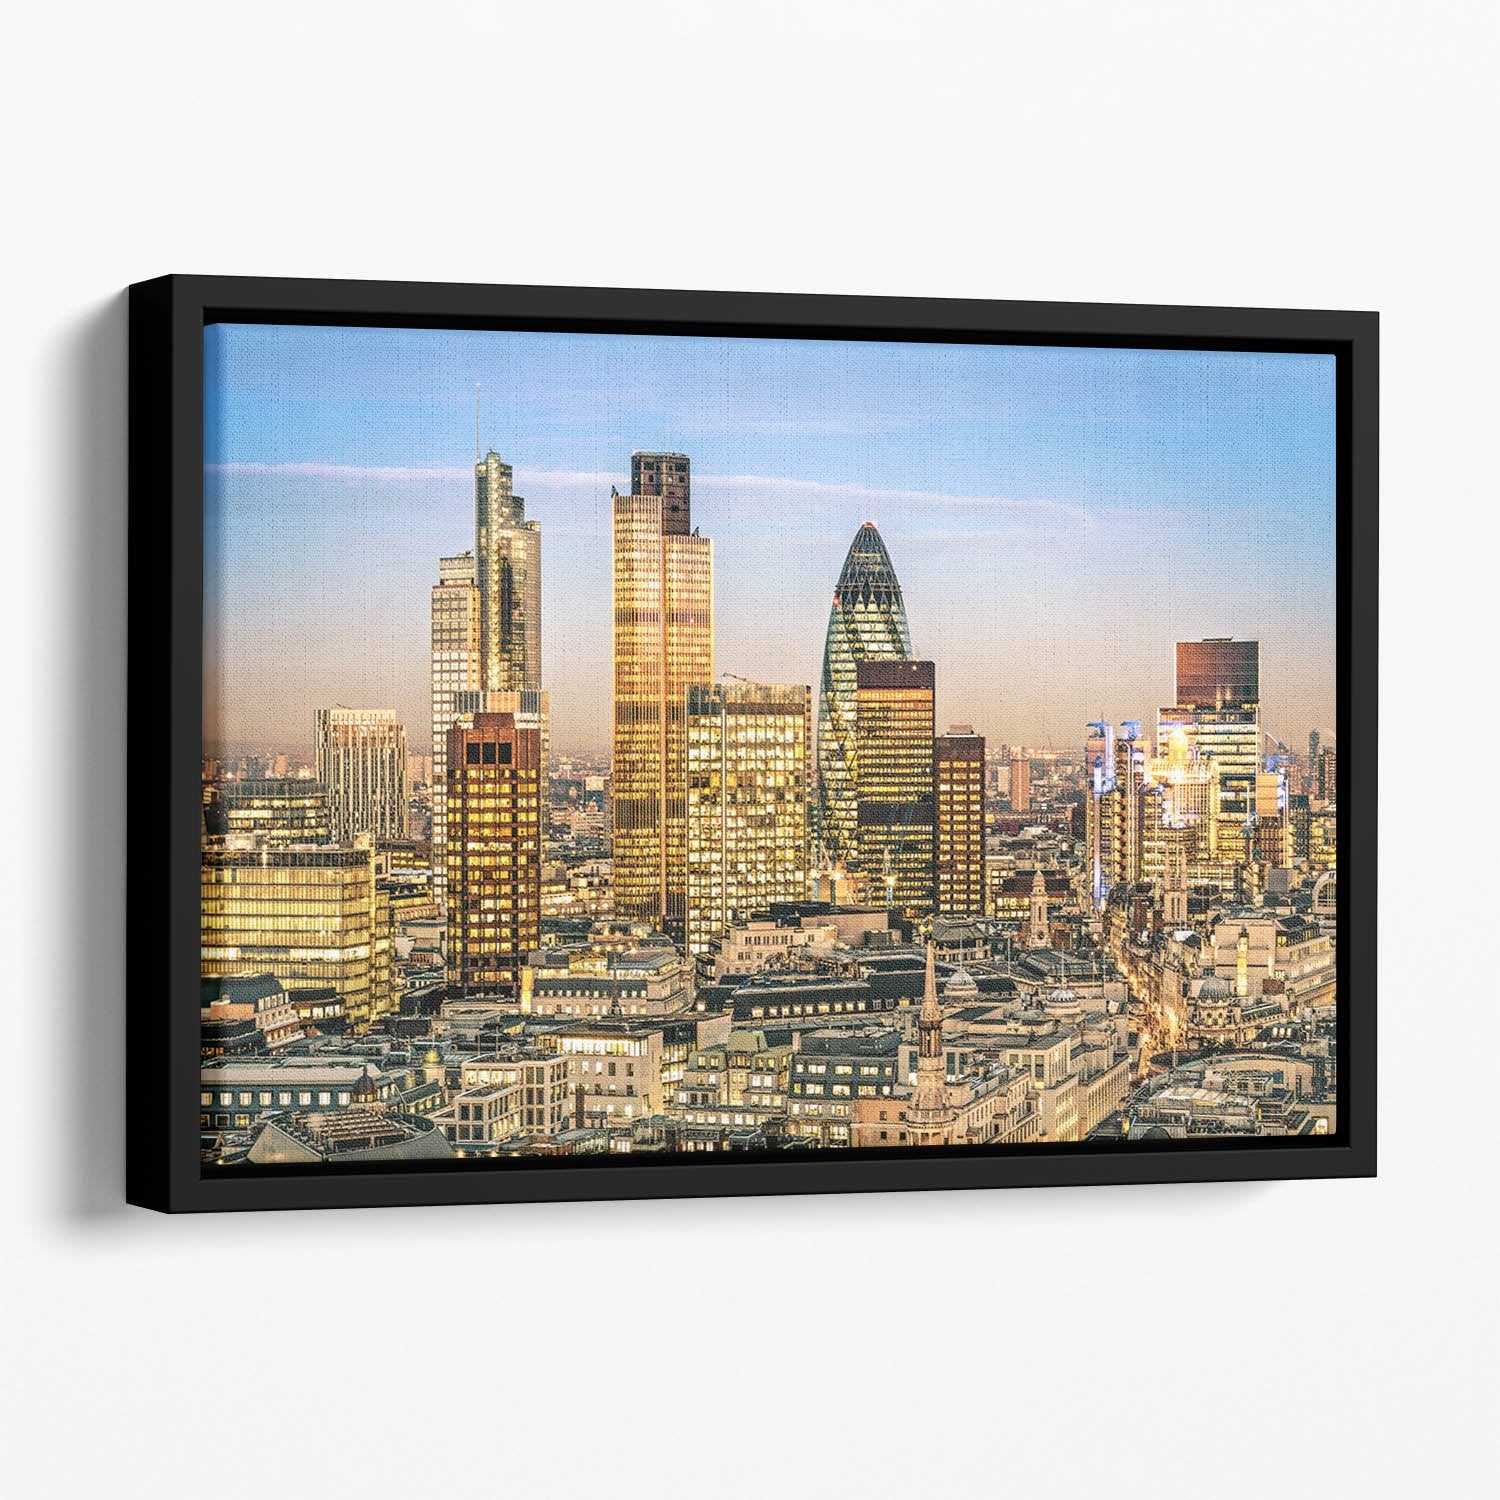 Stock Exchange Tower and Lloyds of London Floating Framed Canvas